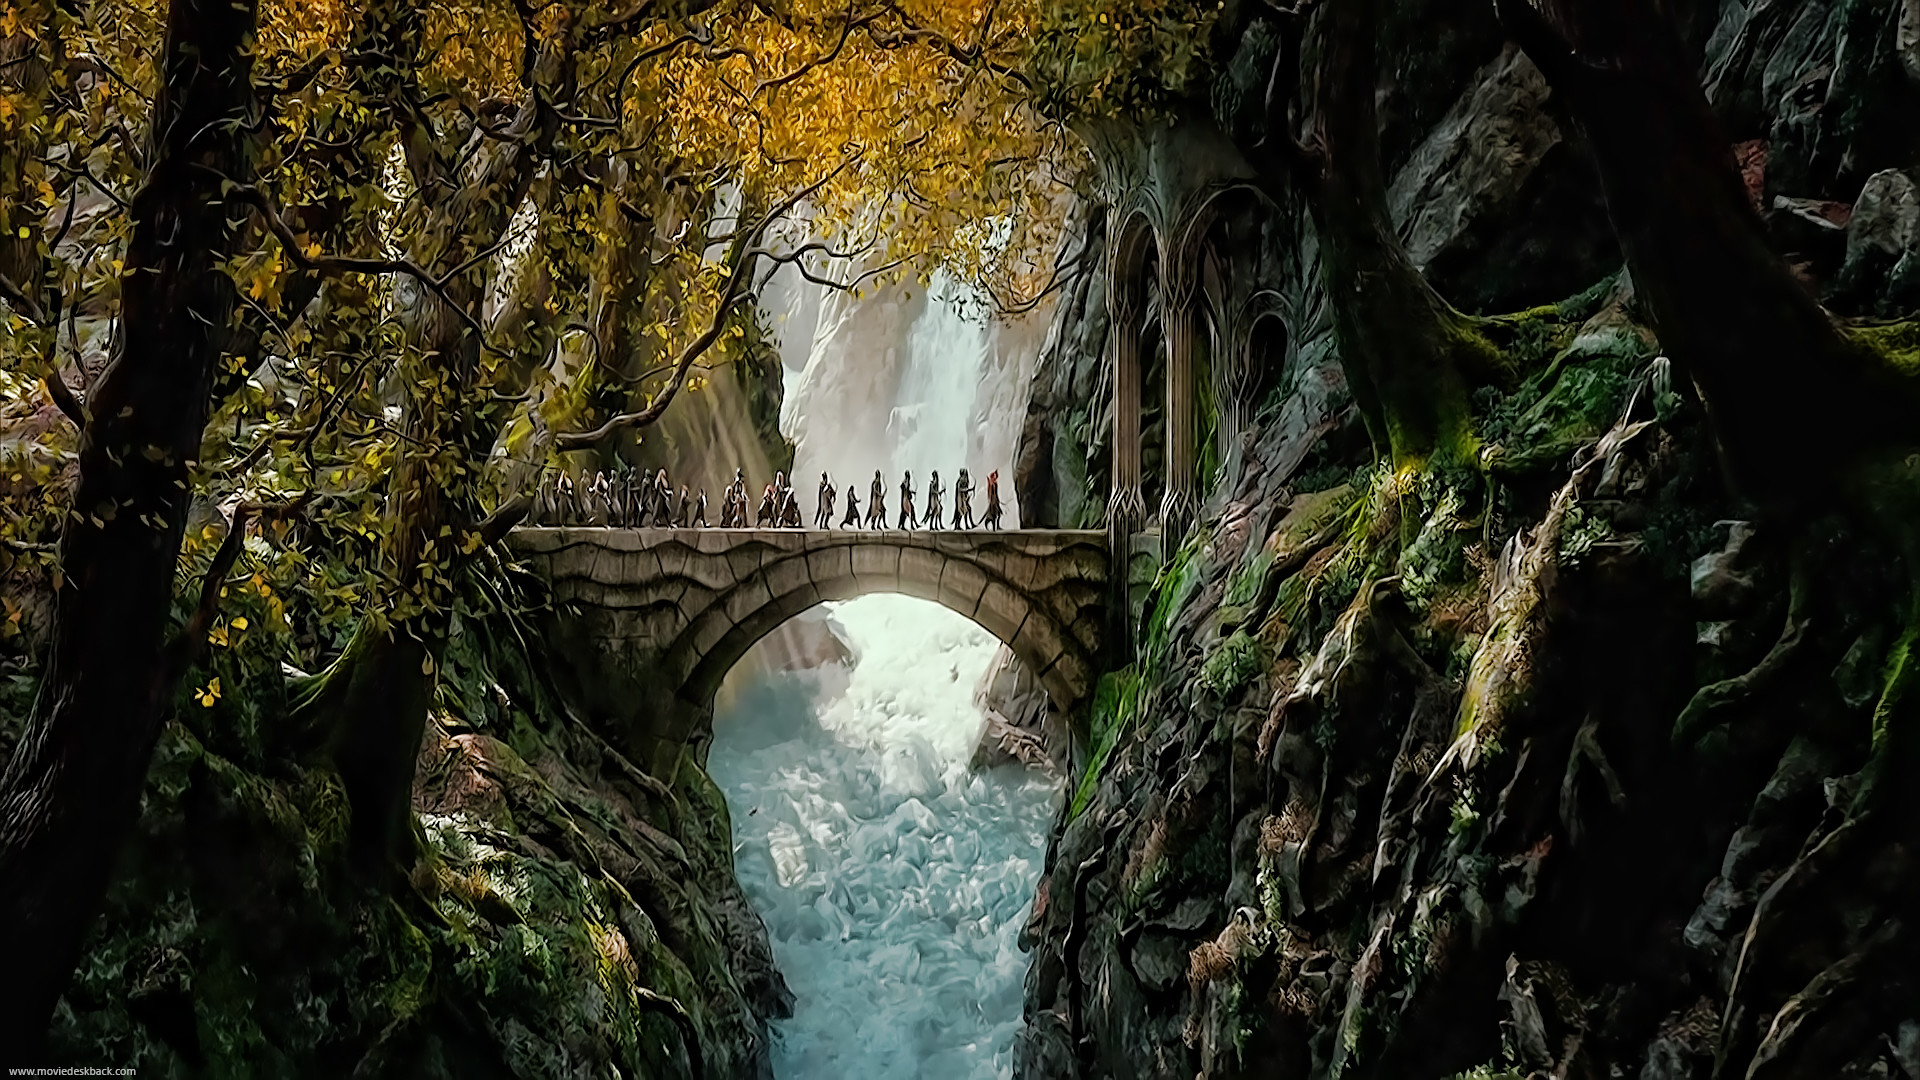 1920x1080 The Hobbit The Battle of The Five Armies Angry Smaug HD Wallpaper | The  Hobbit | Pinterest | Hobbit, Hd wallpaper and Army